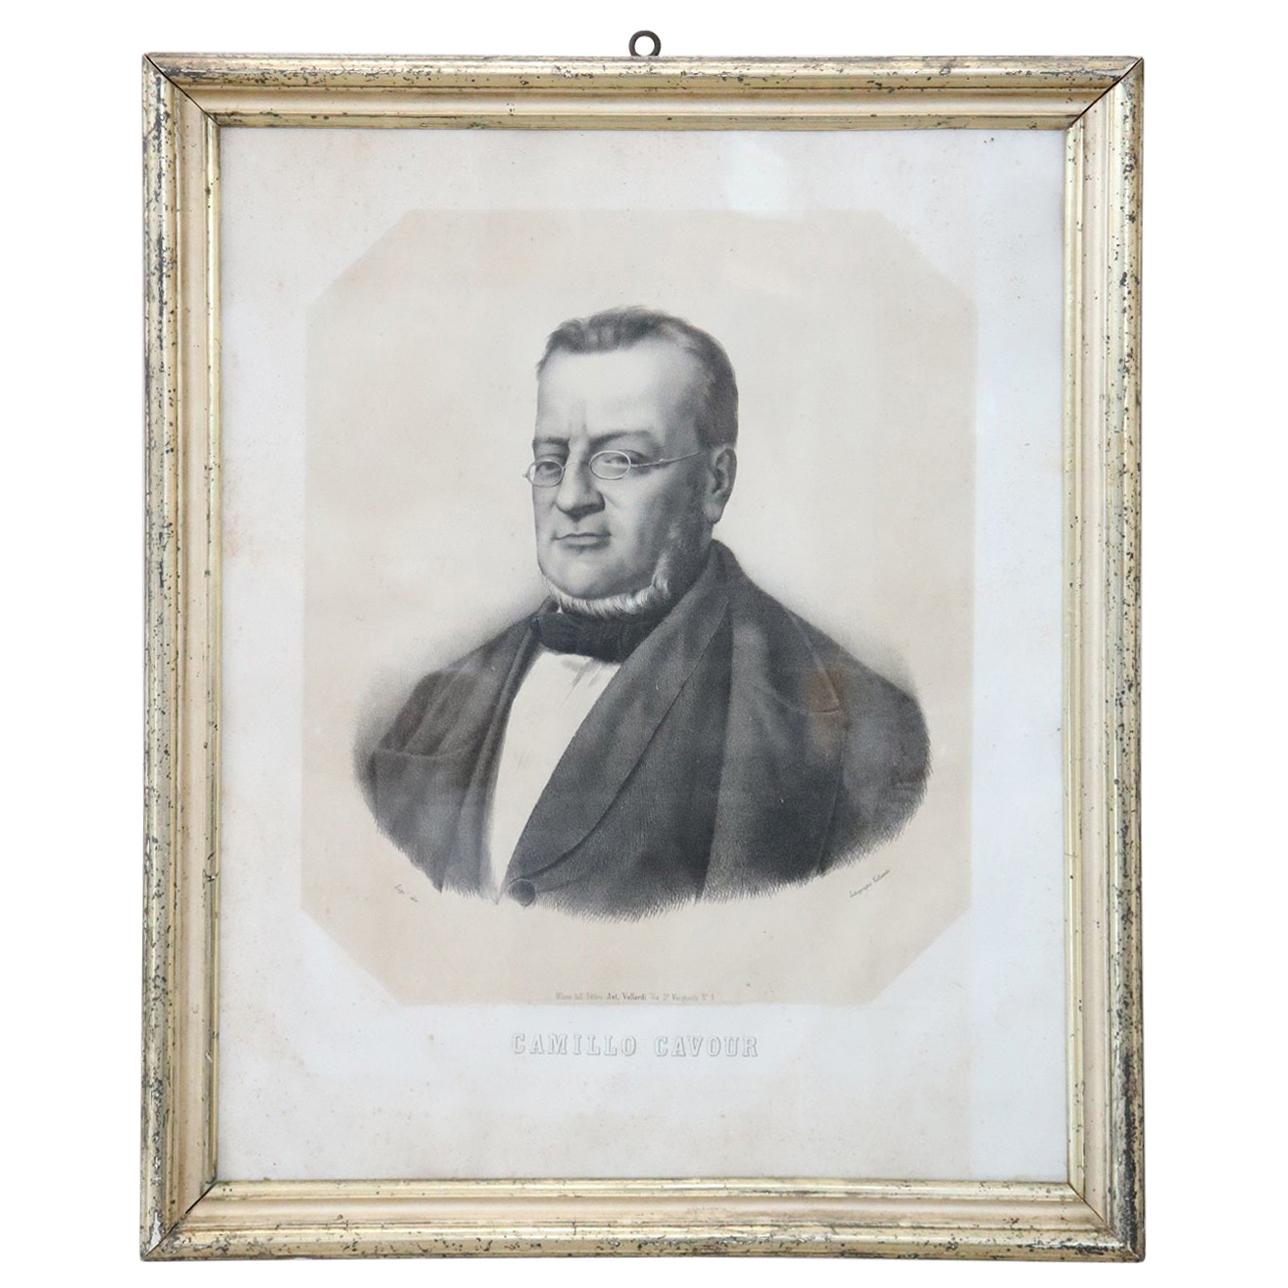 19th Century Italian Lithography Important Italian Politician Count of Cavour